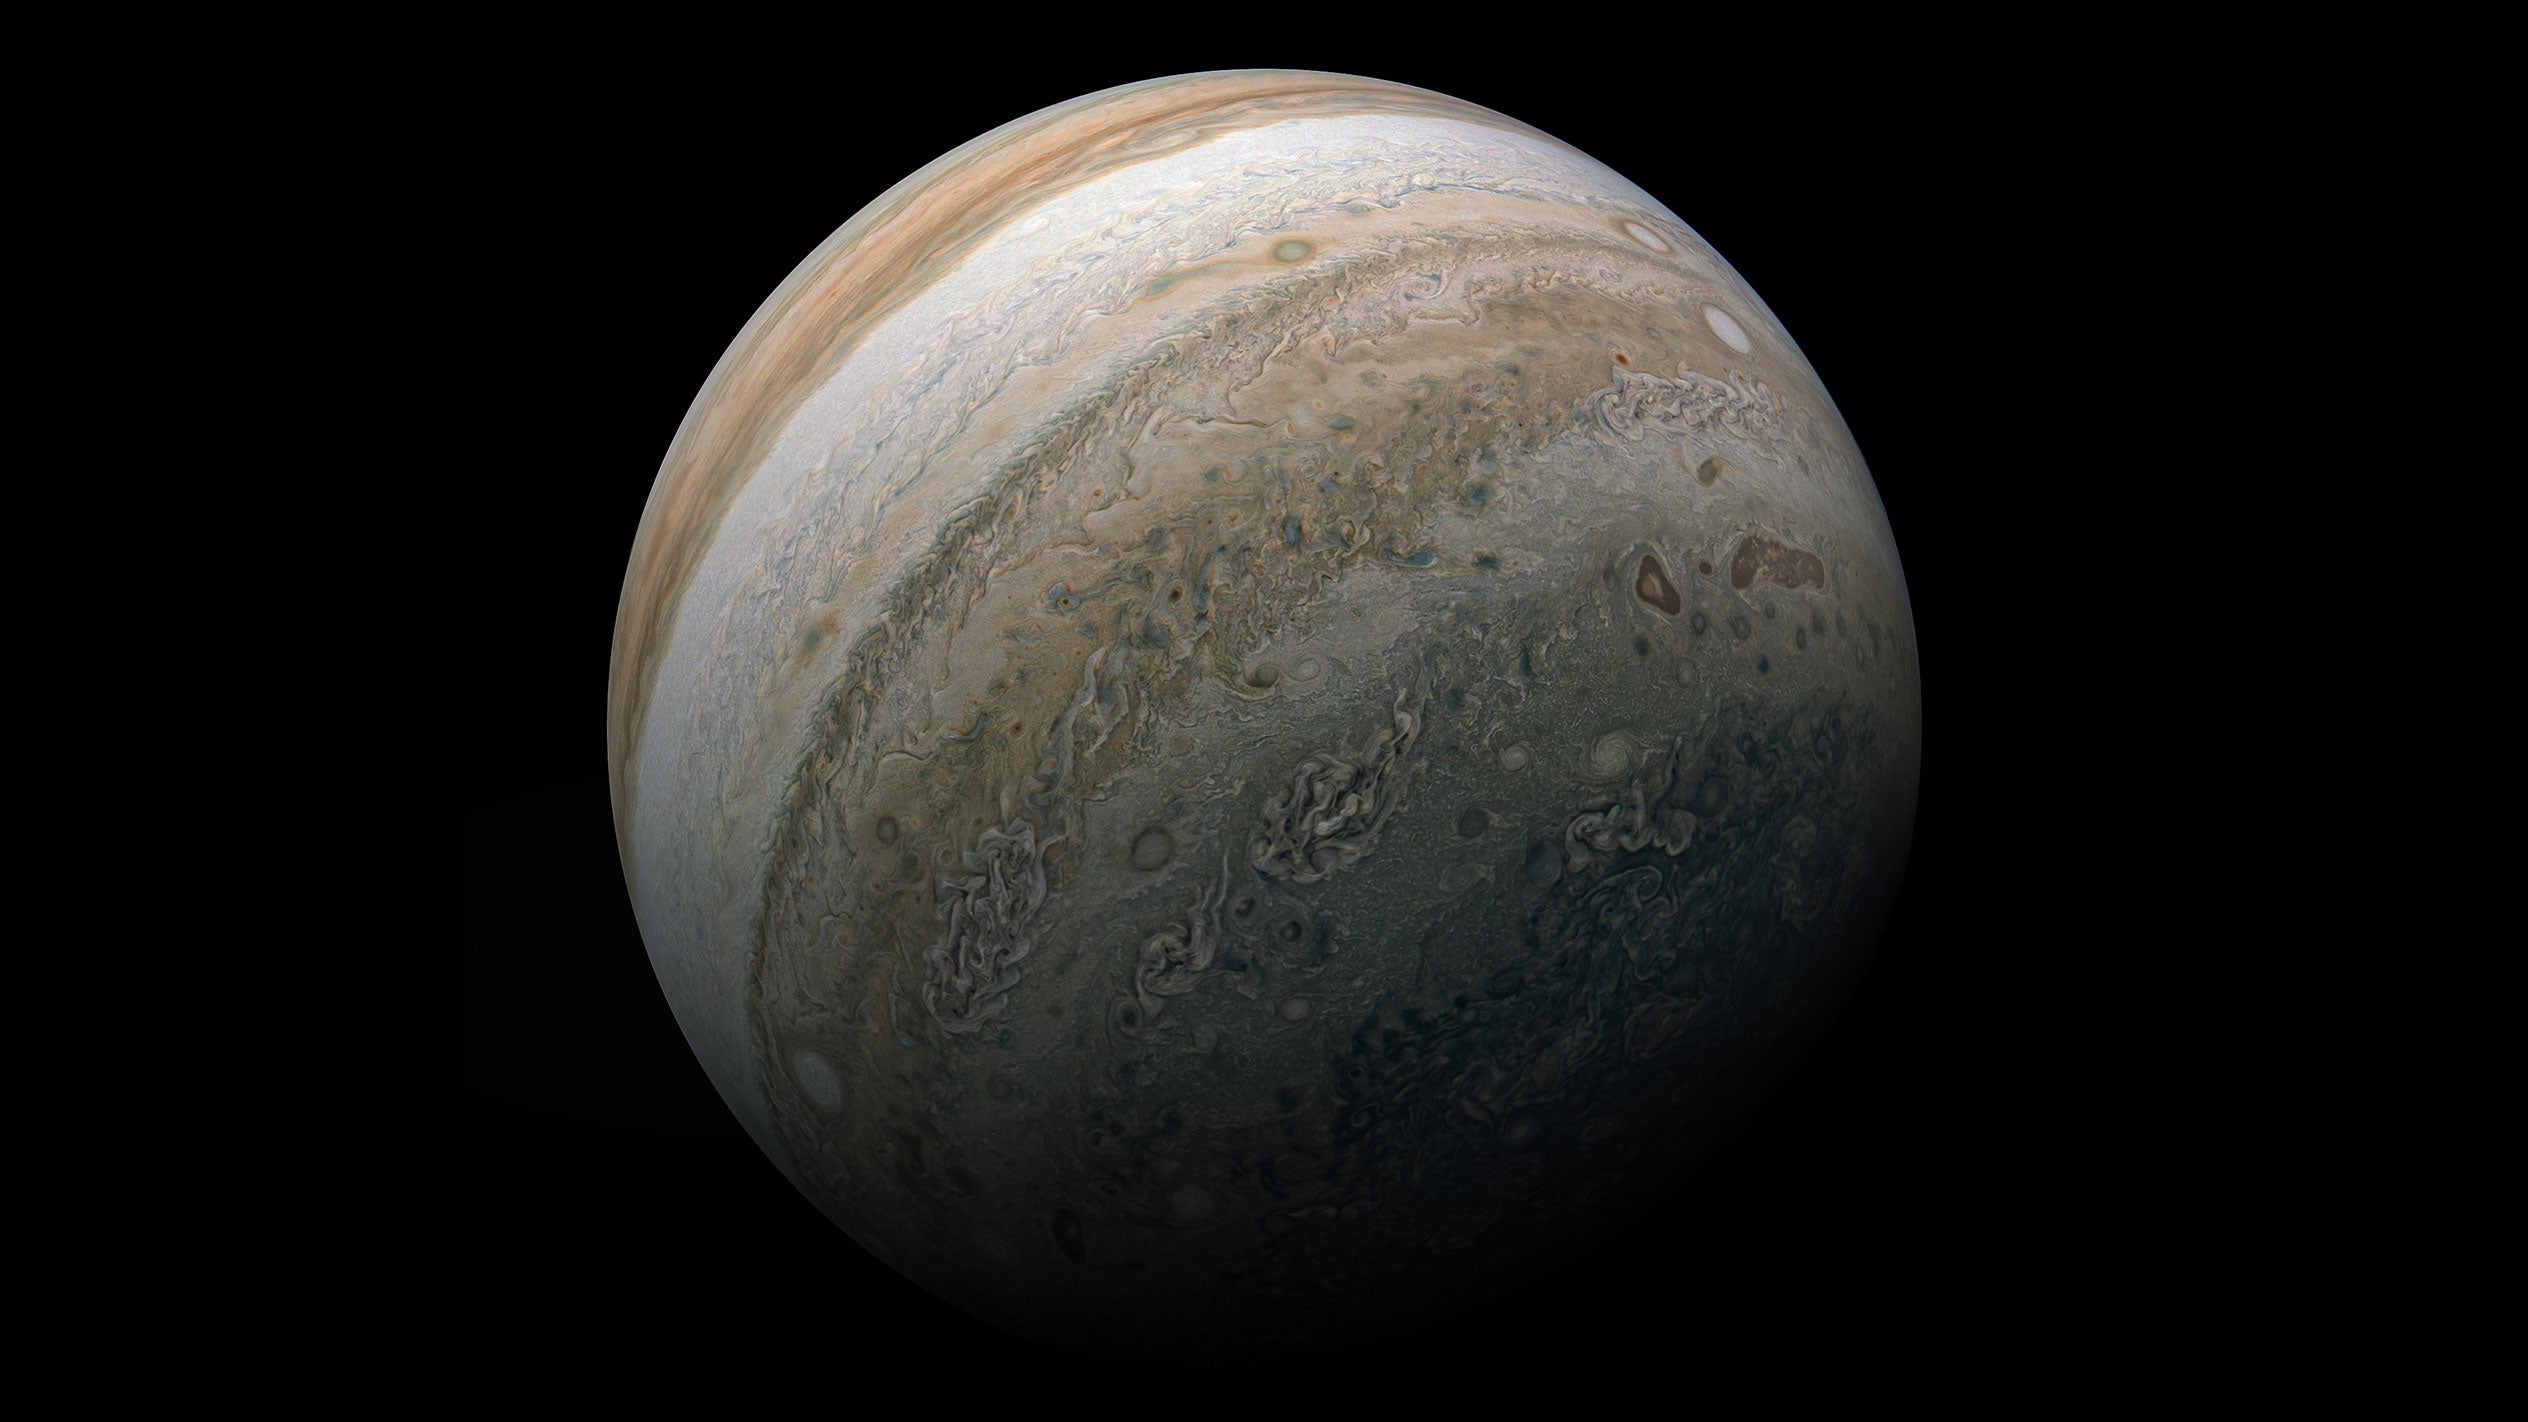 See Jupiter Shine During its Closest Approach to Earth Since 1963